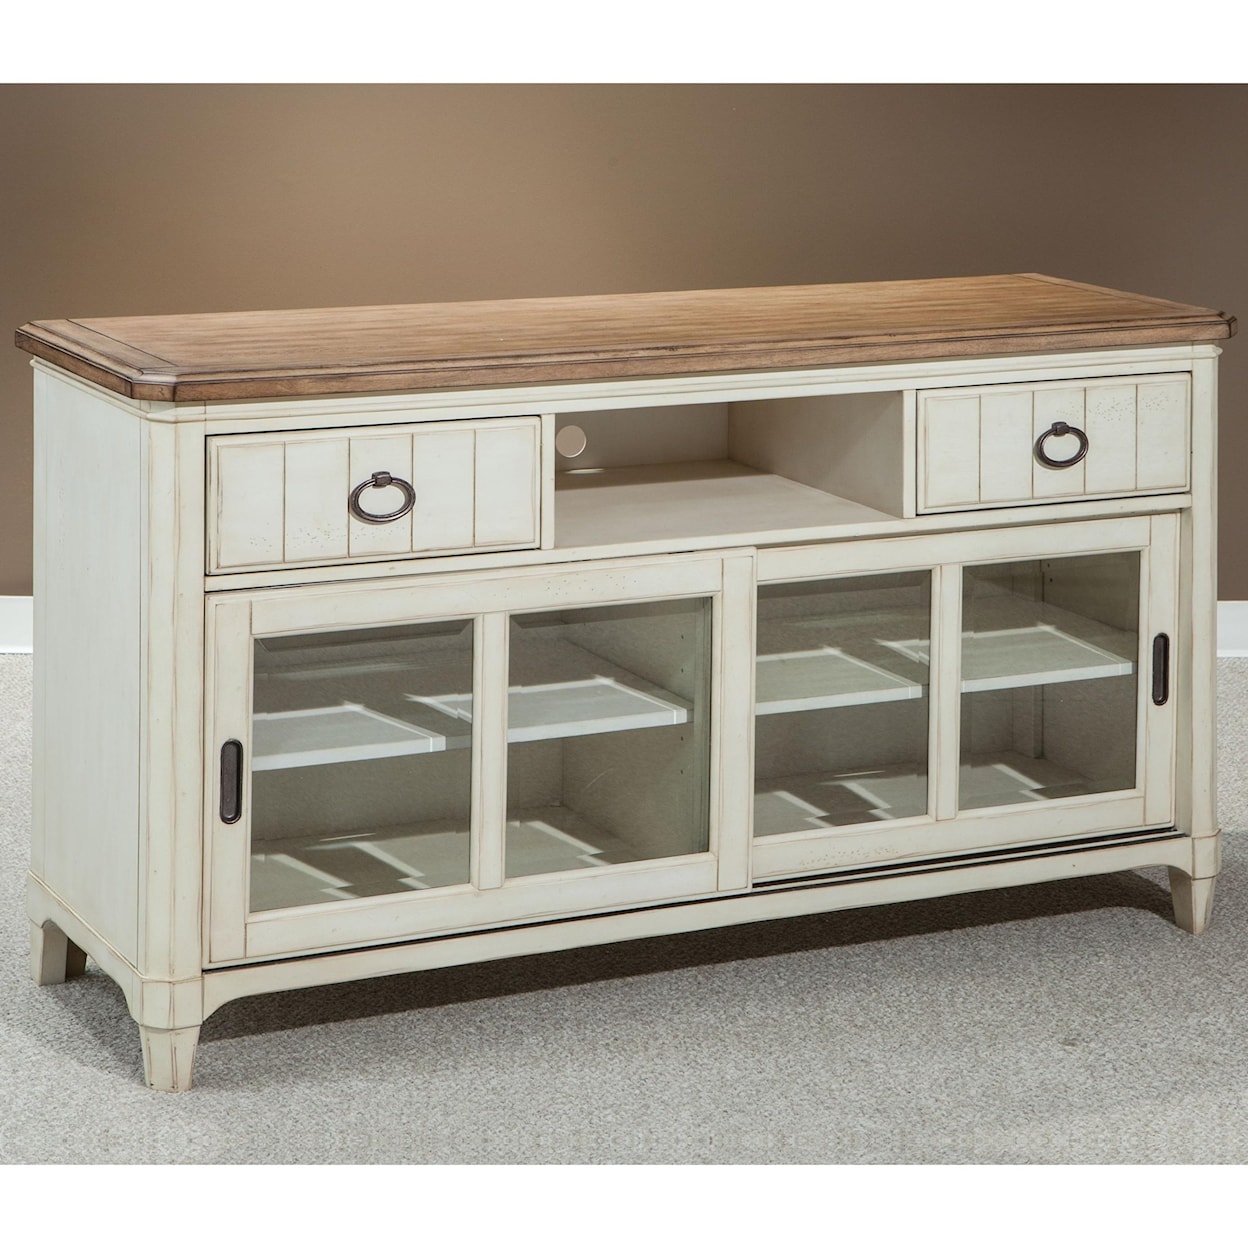 Panama Jack by Palmetto Home Millbrook Entertainment Console